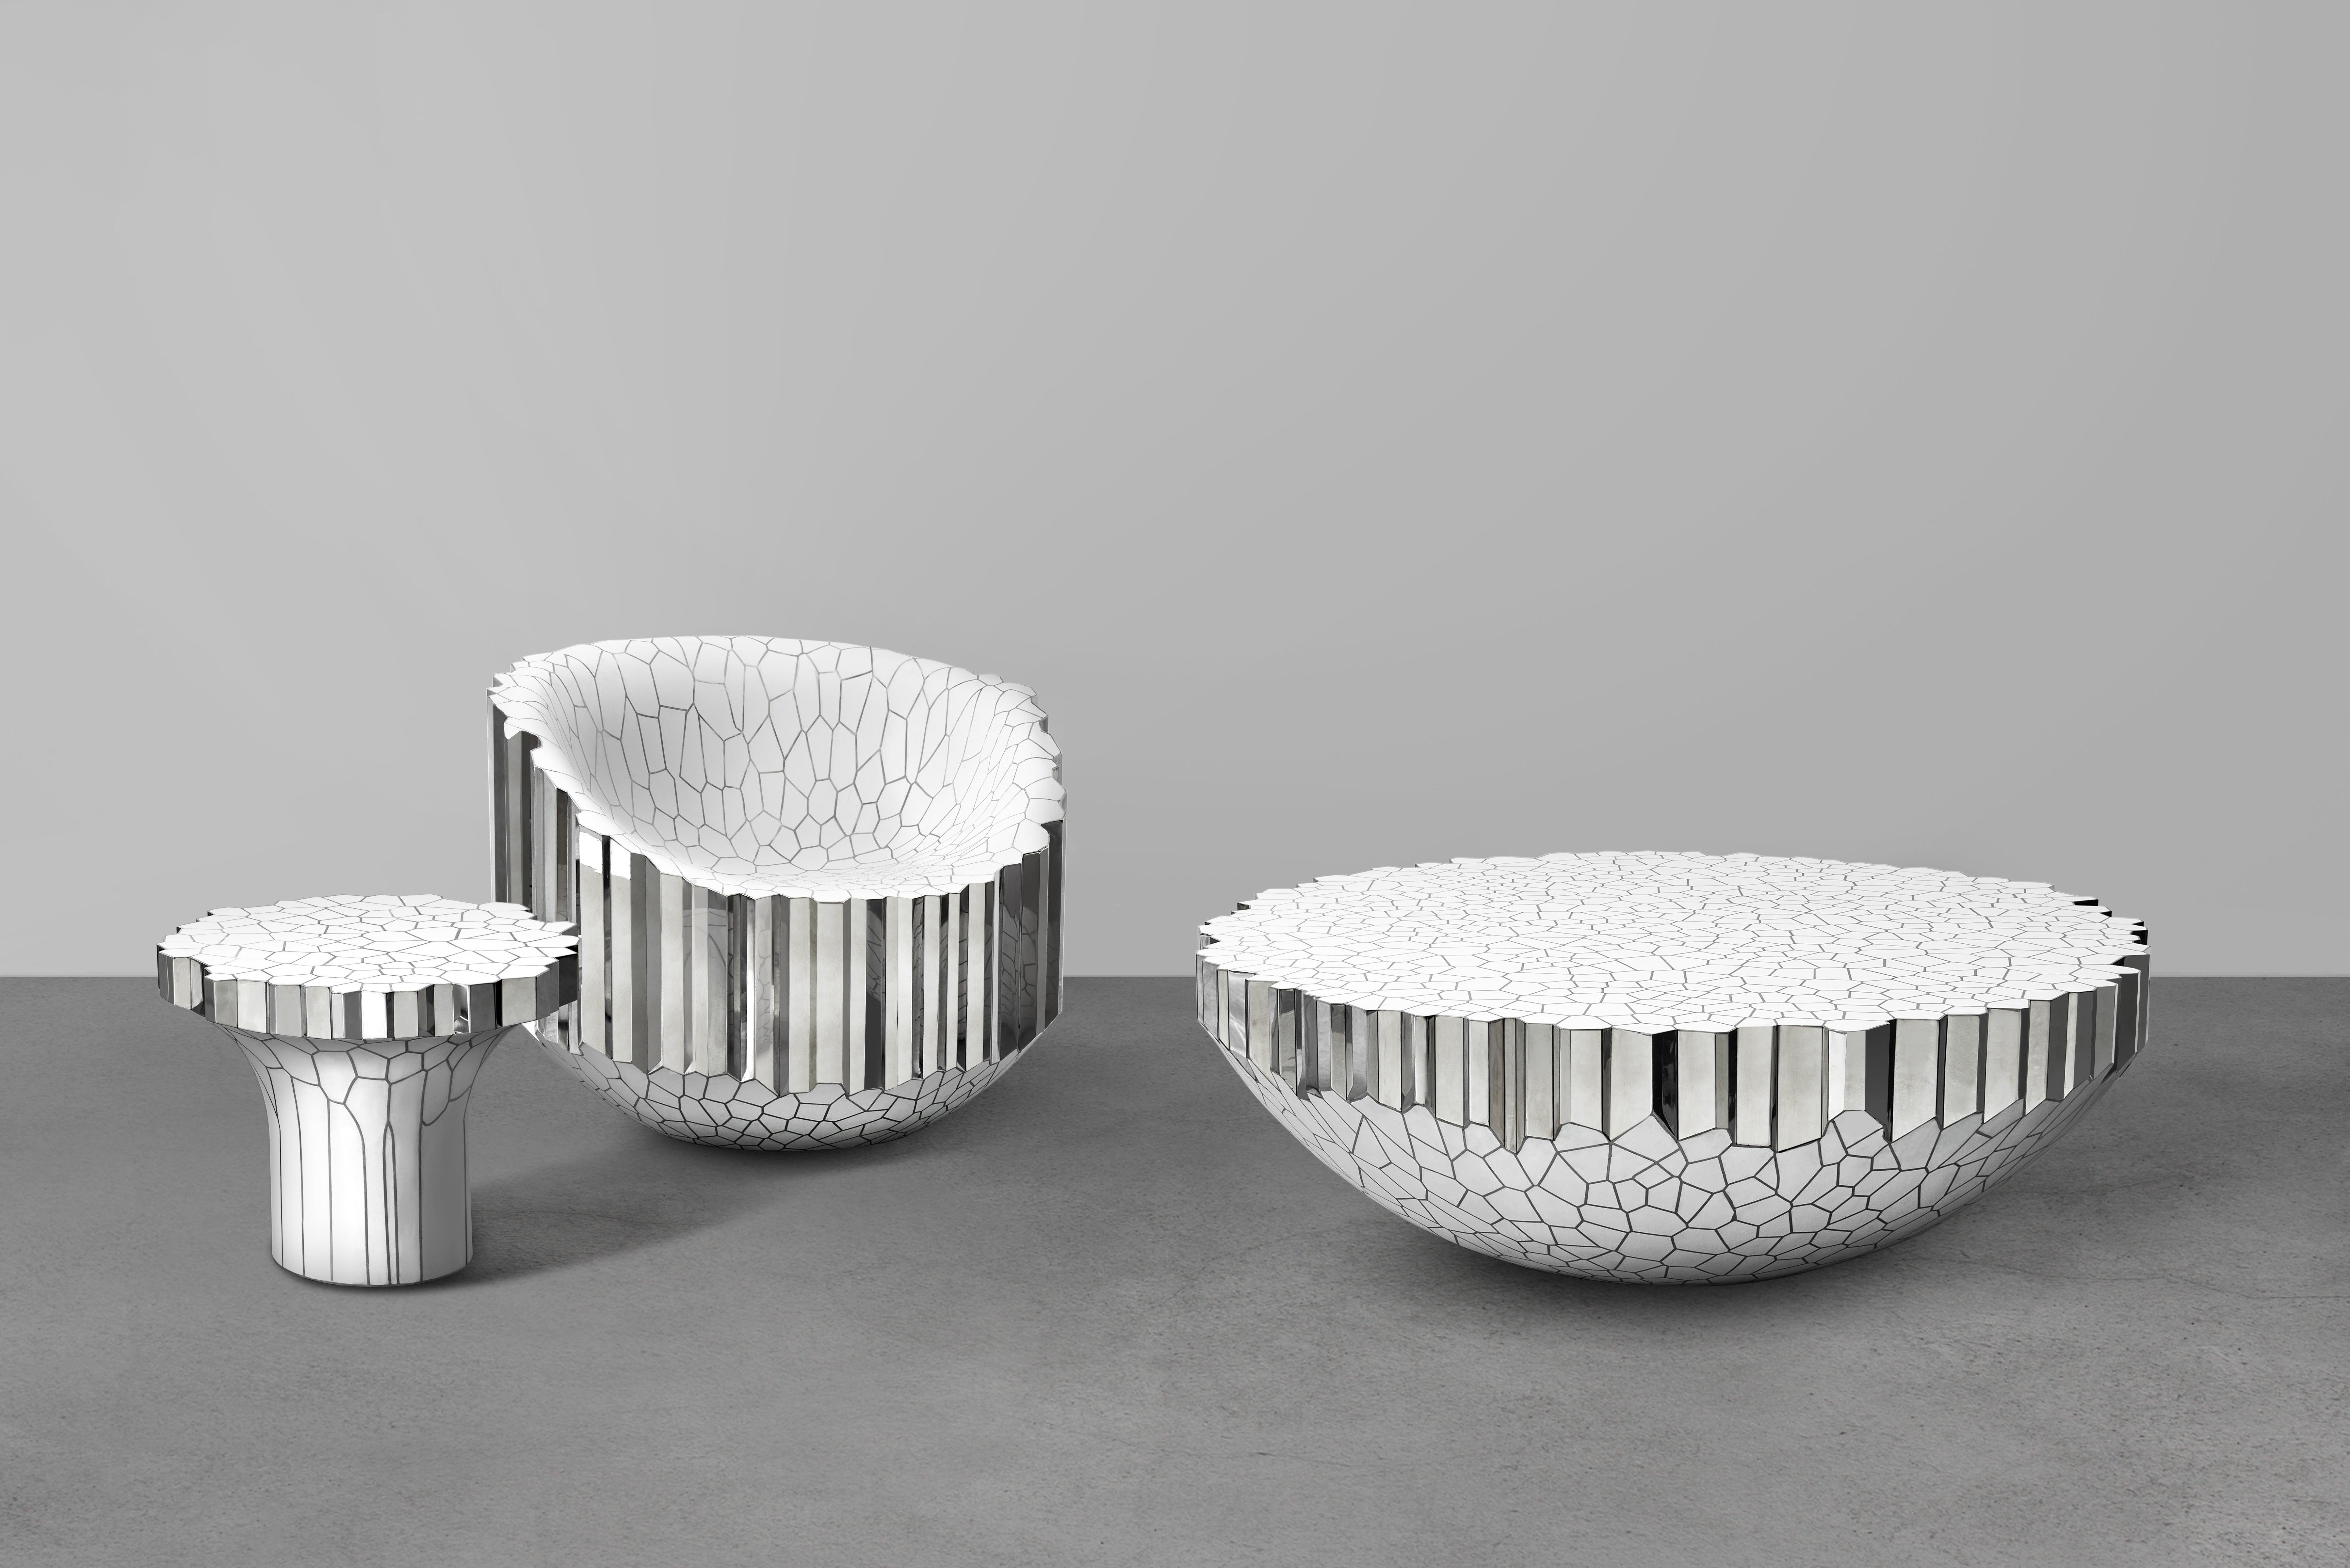 The collection consists of a chair, a side table, a writing desk, a round coffee table, a console and a lounge chair. All the work in the collection will be composed of polished stainless steel with white enamel surfaces. Each piece consists of a